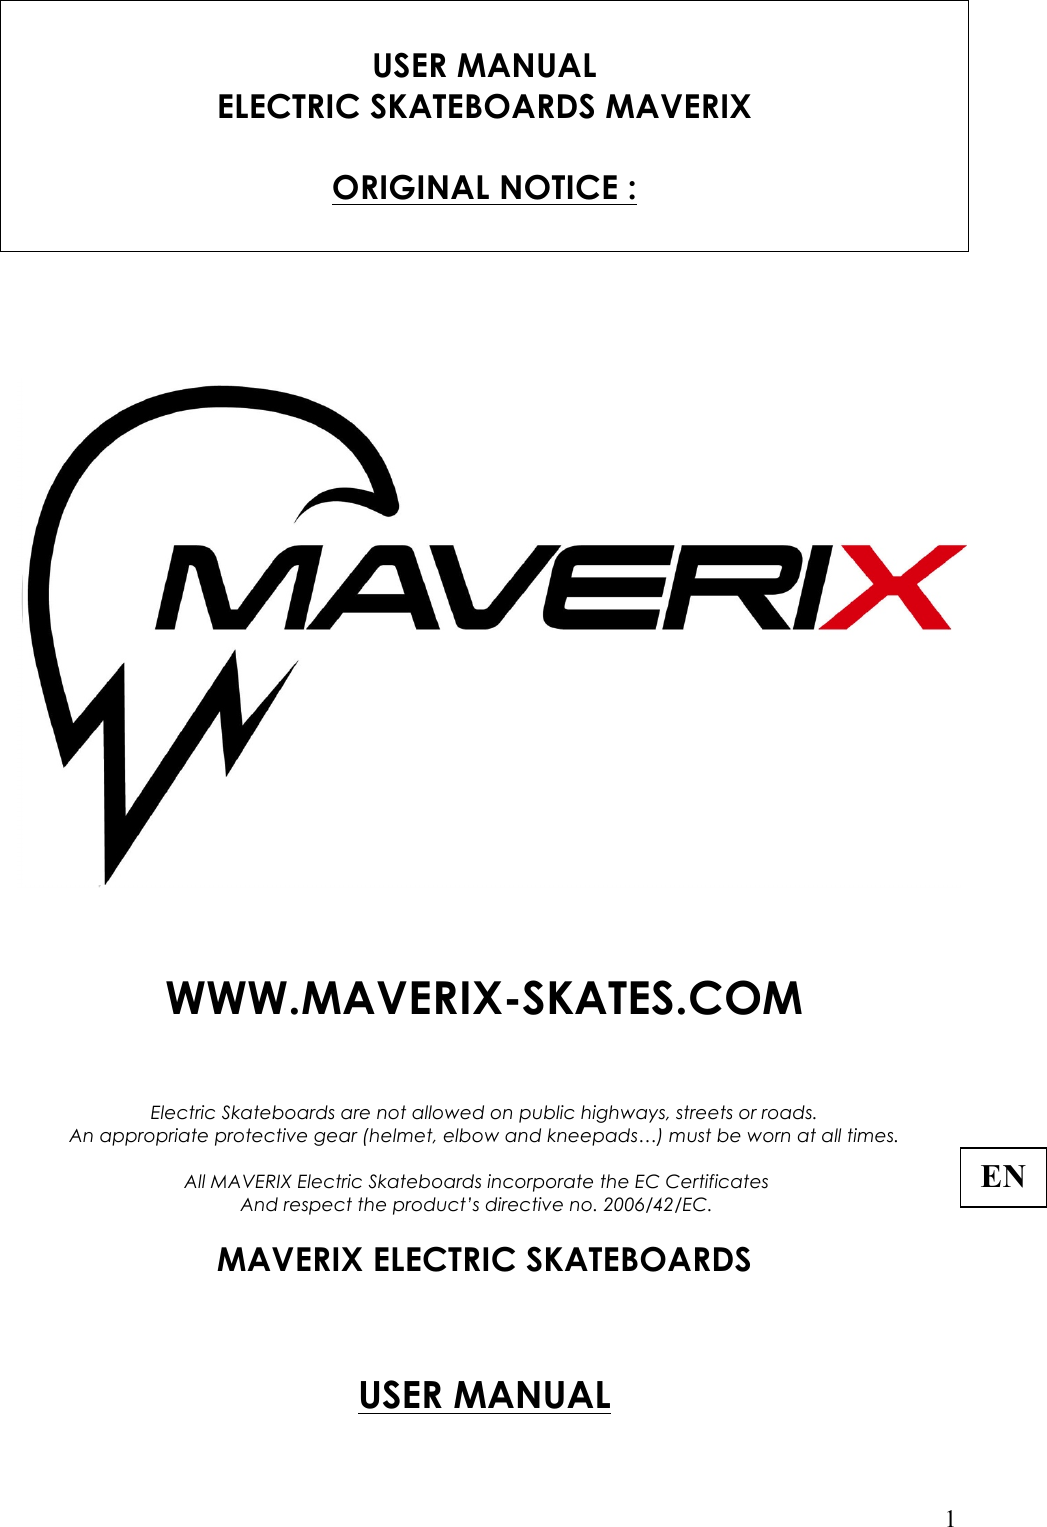   1  USER MANUAL ELECTRIC SKATEBOARDS MAVERIX   ORIGINAL NOTICE :      WWW.MAVERIX-SKATES.COM                                           Electric Skateboards are not allowed on public highways, streets or roads. An appropriate protective gear (helmet, elbow and kneepads…) must be worn at all times.  All MAVERIX Electric Skateboards incorporate the EC Certificates And respect the product’s directive no. 2006/42/EC.  MAVERIX ELECTRIC SKATEBOARDS      USER MANUAL  ENR 